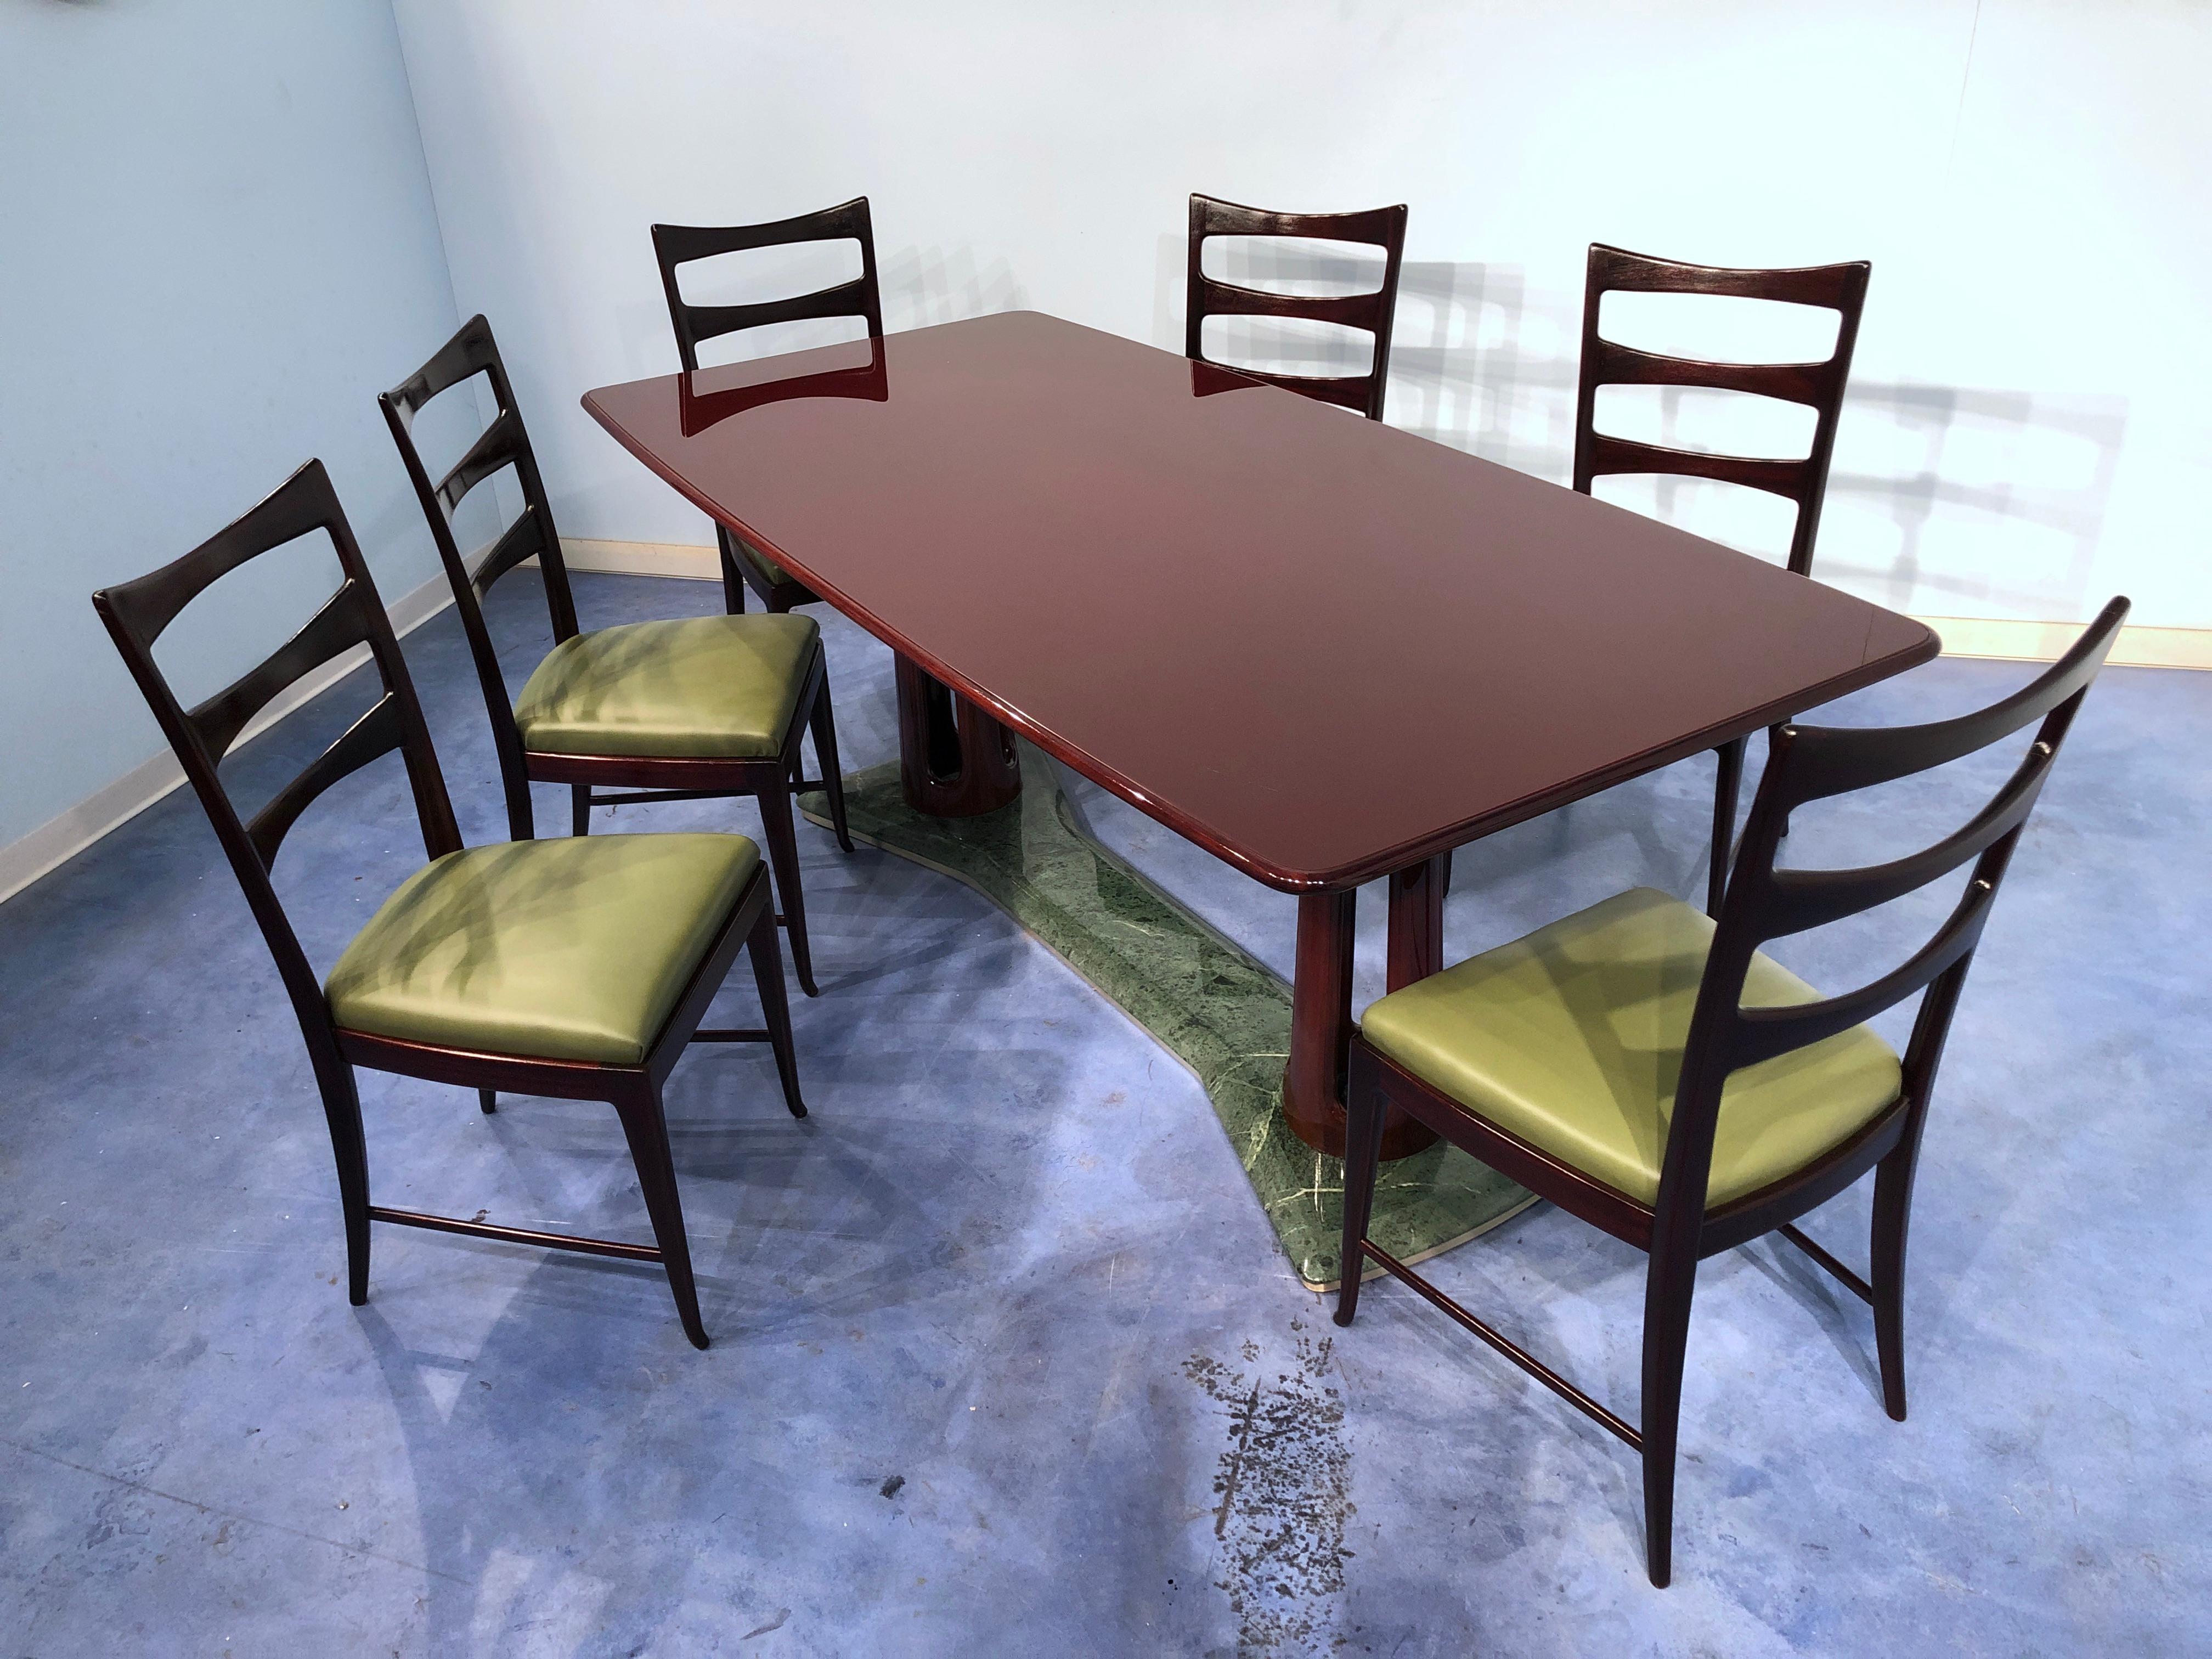 Italian Mid-Century Modern Dining Table by Vittorio Dassi, 1950s For Sale 15